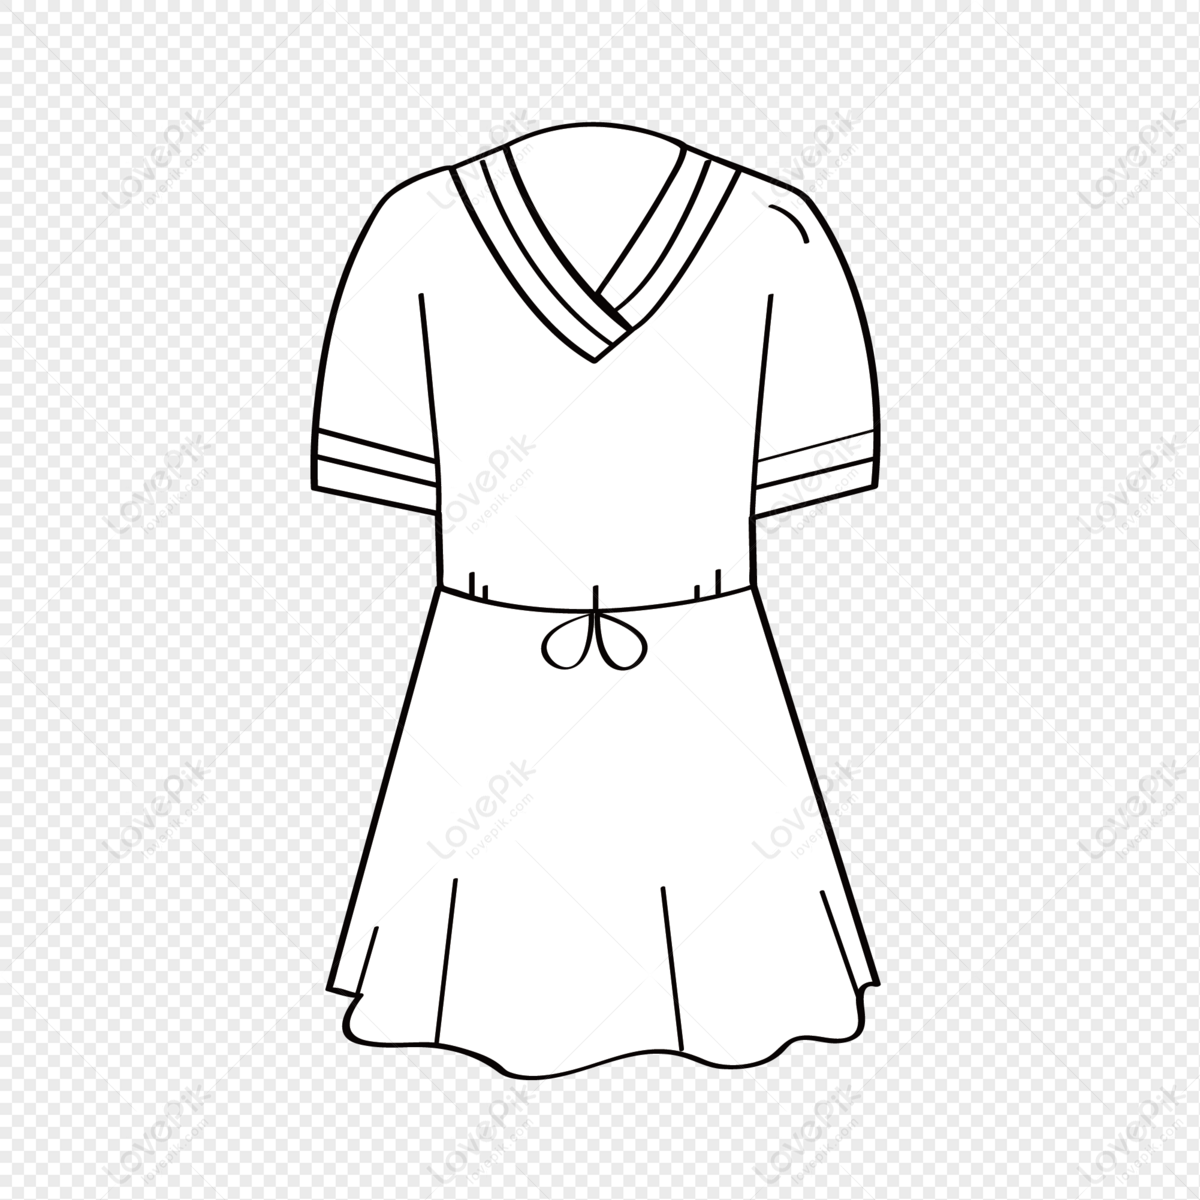 Dress PNG Image And Clipart Image For Free Download - Lovepik | 401708088